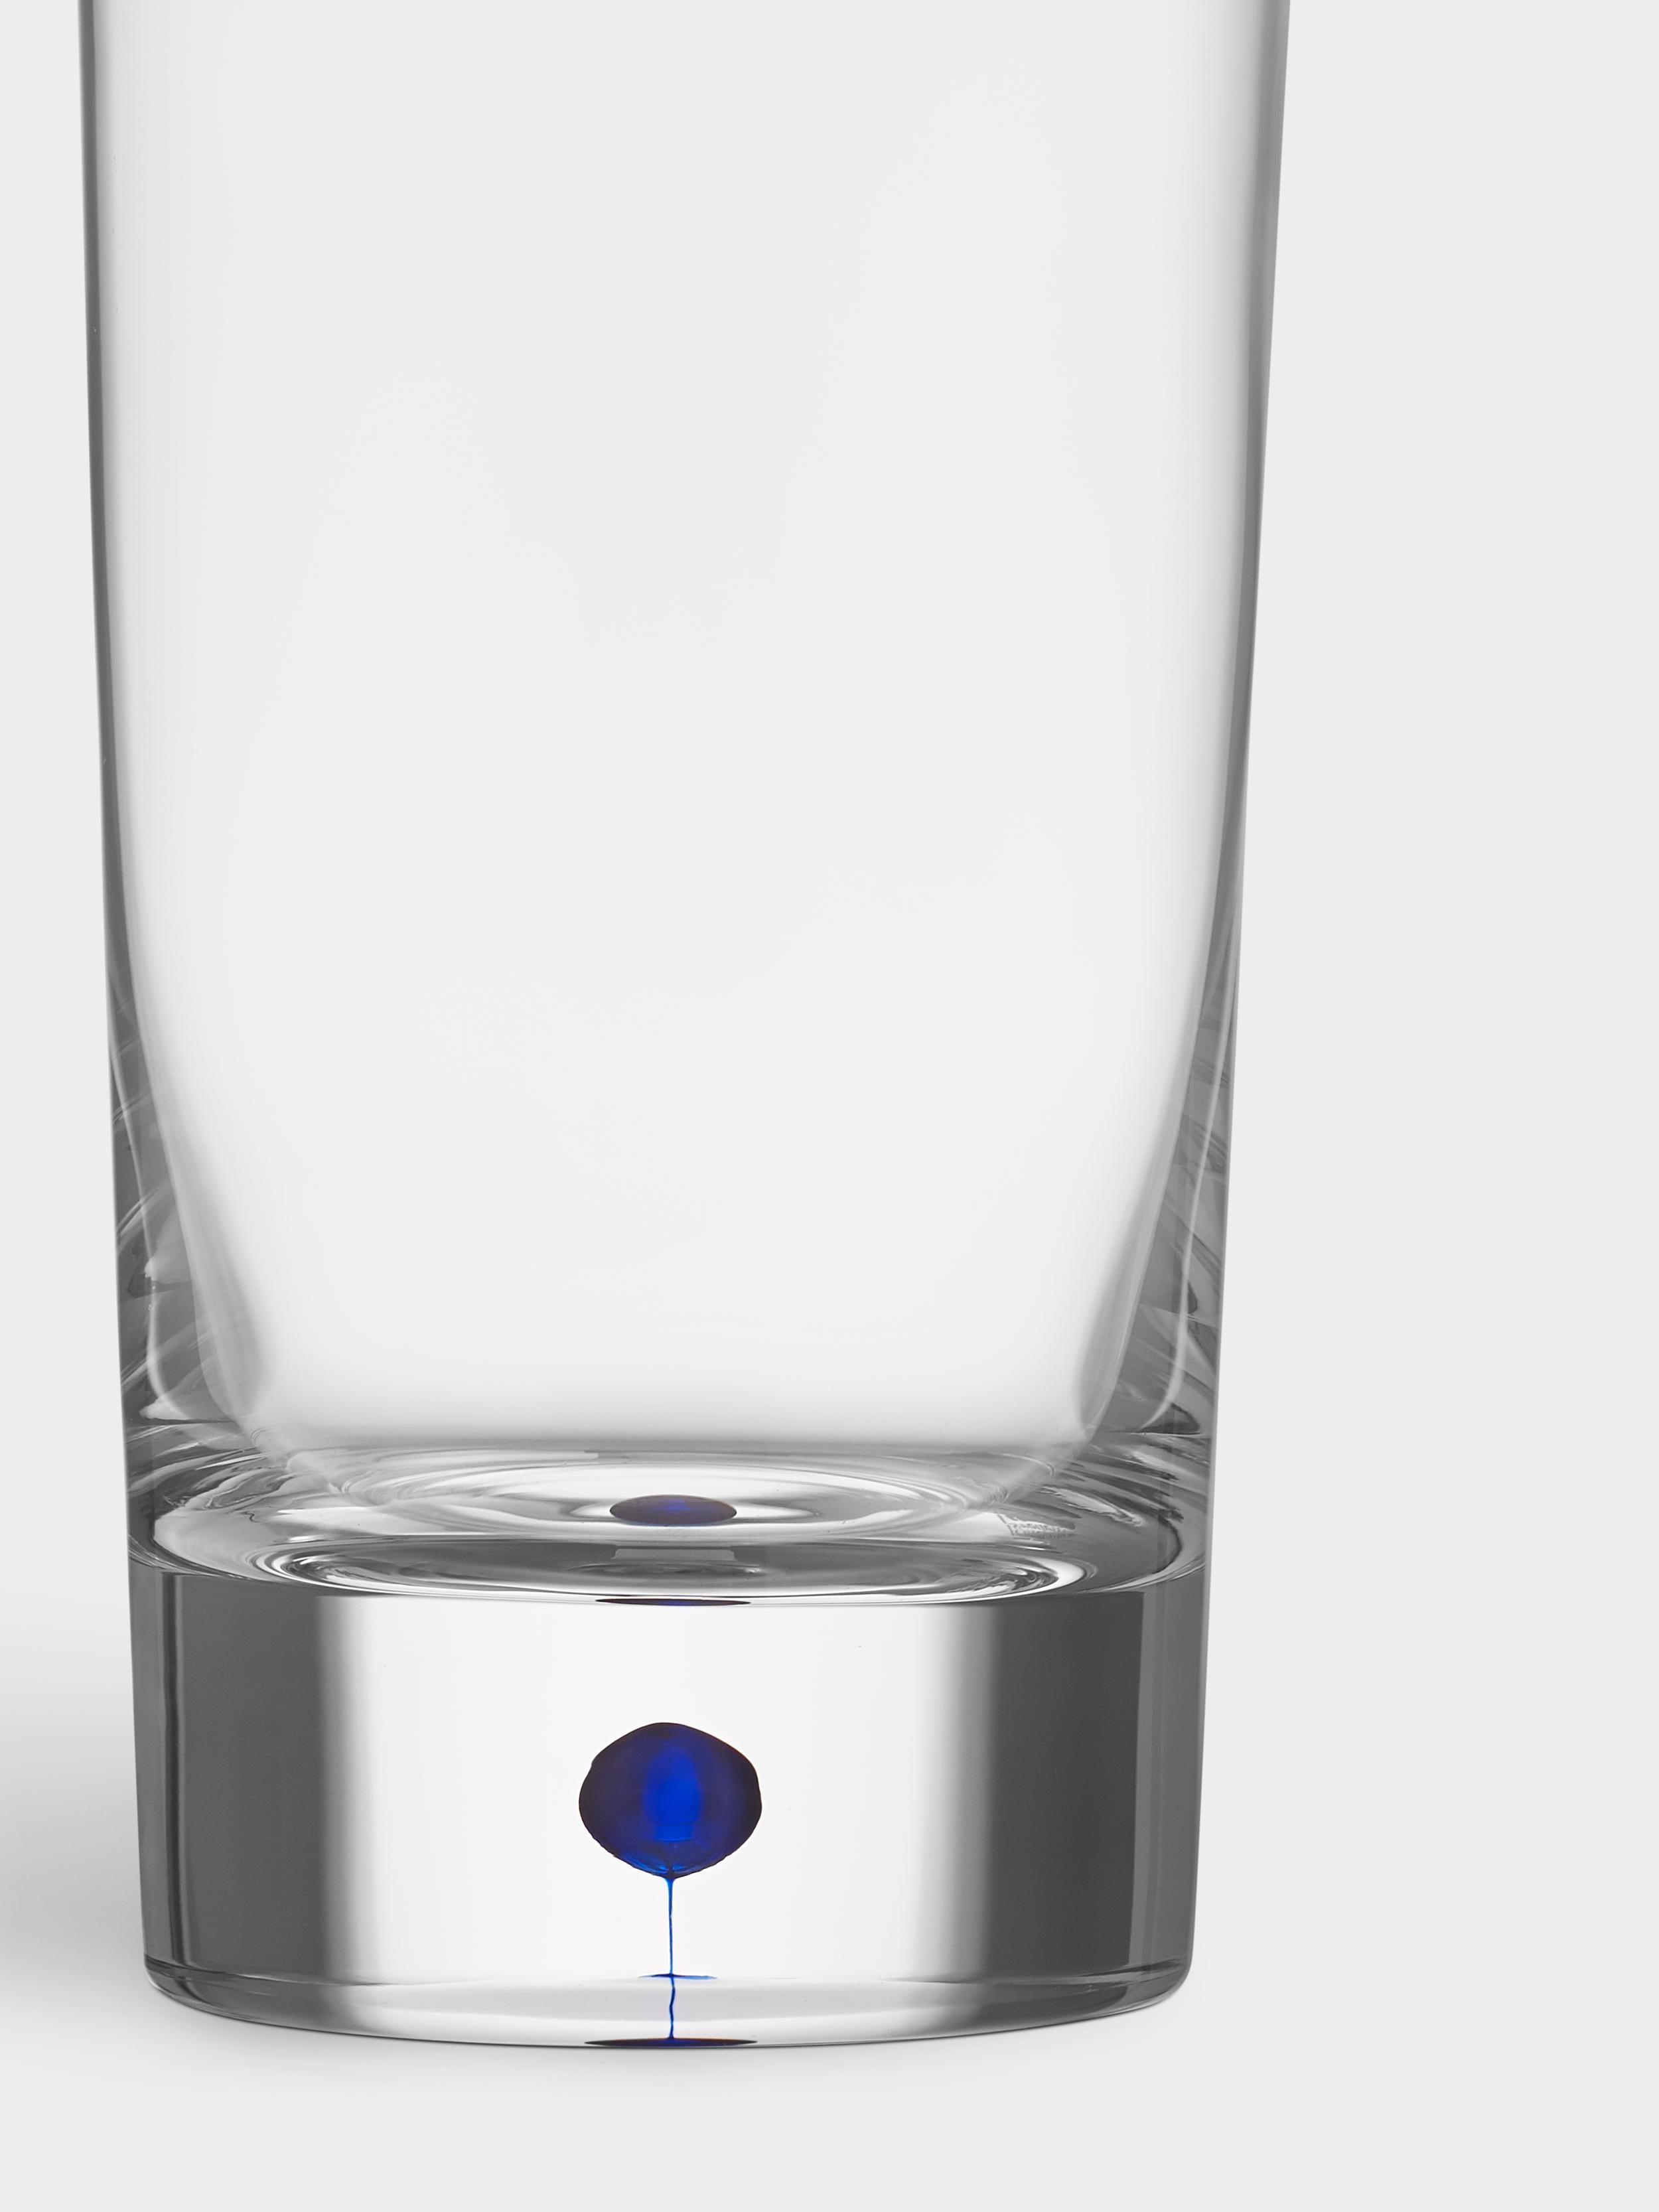 Intermezzo Tumbler from Orrefors was designed in 1984. The glass, which holds 13 oz, is intended as a highball glass for mixed drinks, with or without alcohol. Intermezzo Tumbler is mouth-blown in Sweden by expert glassblowers and has a drop of blue